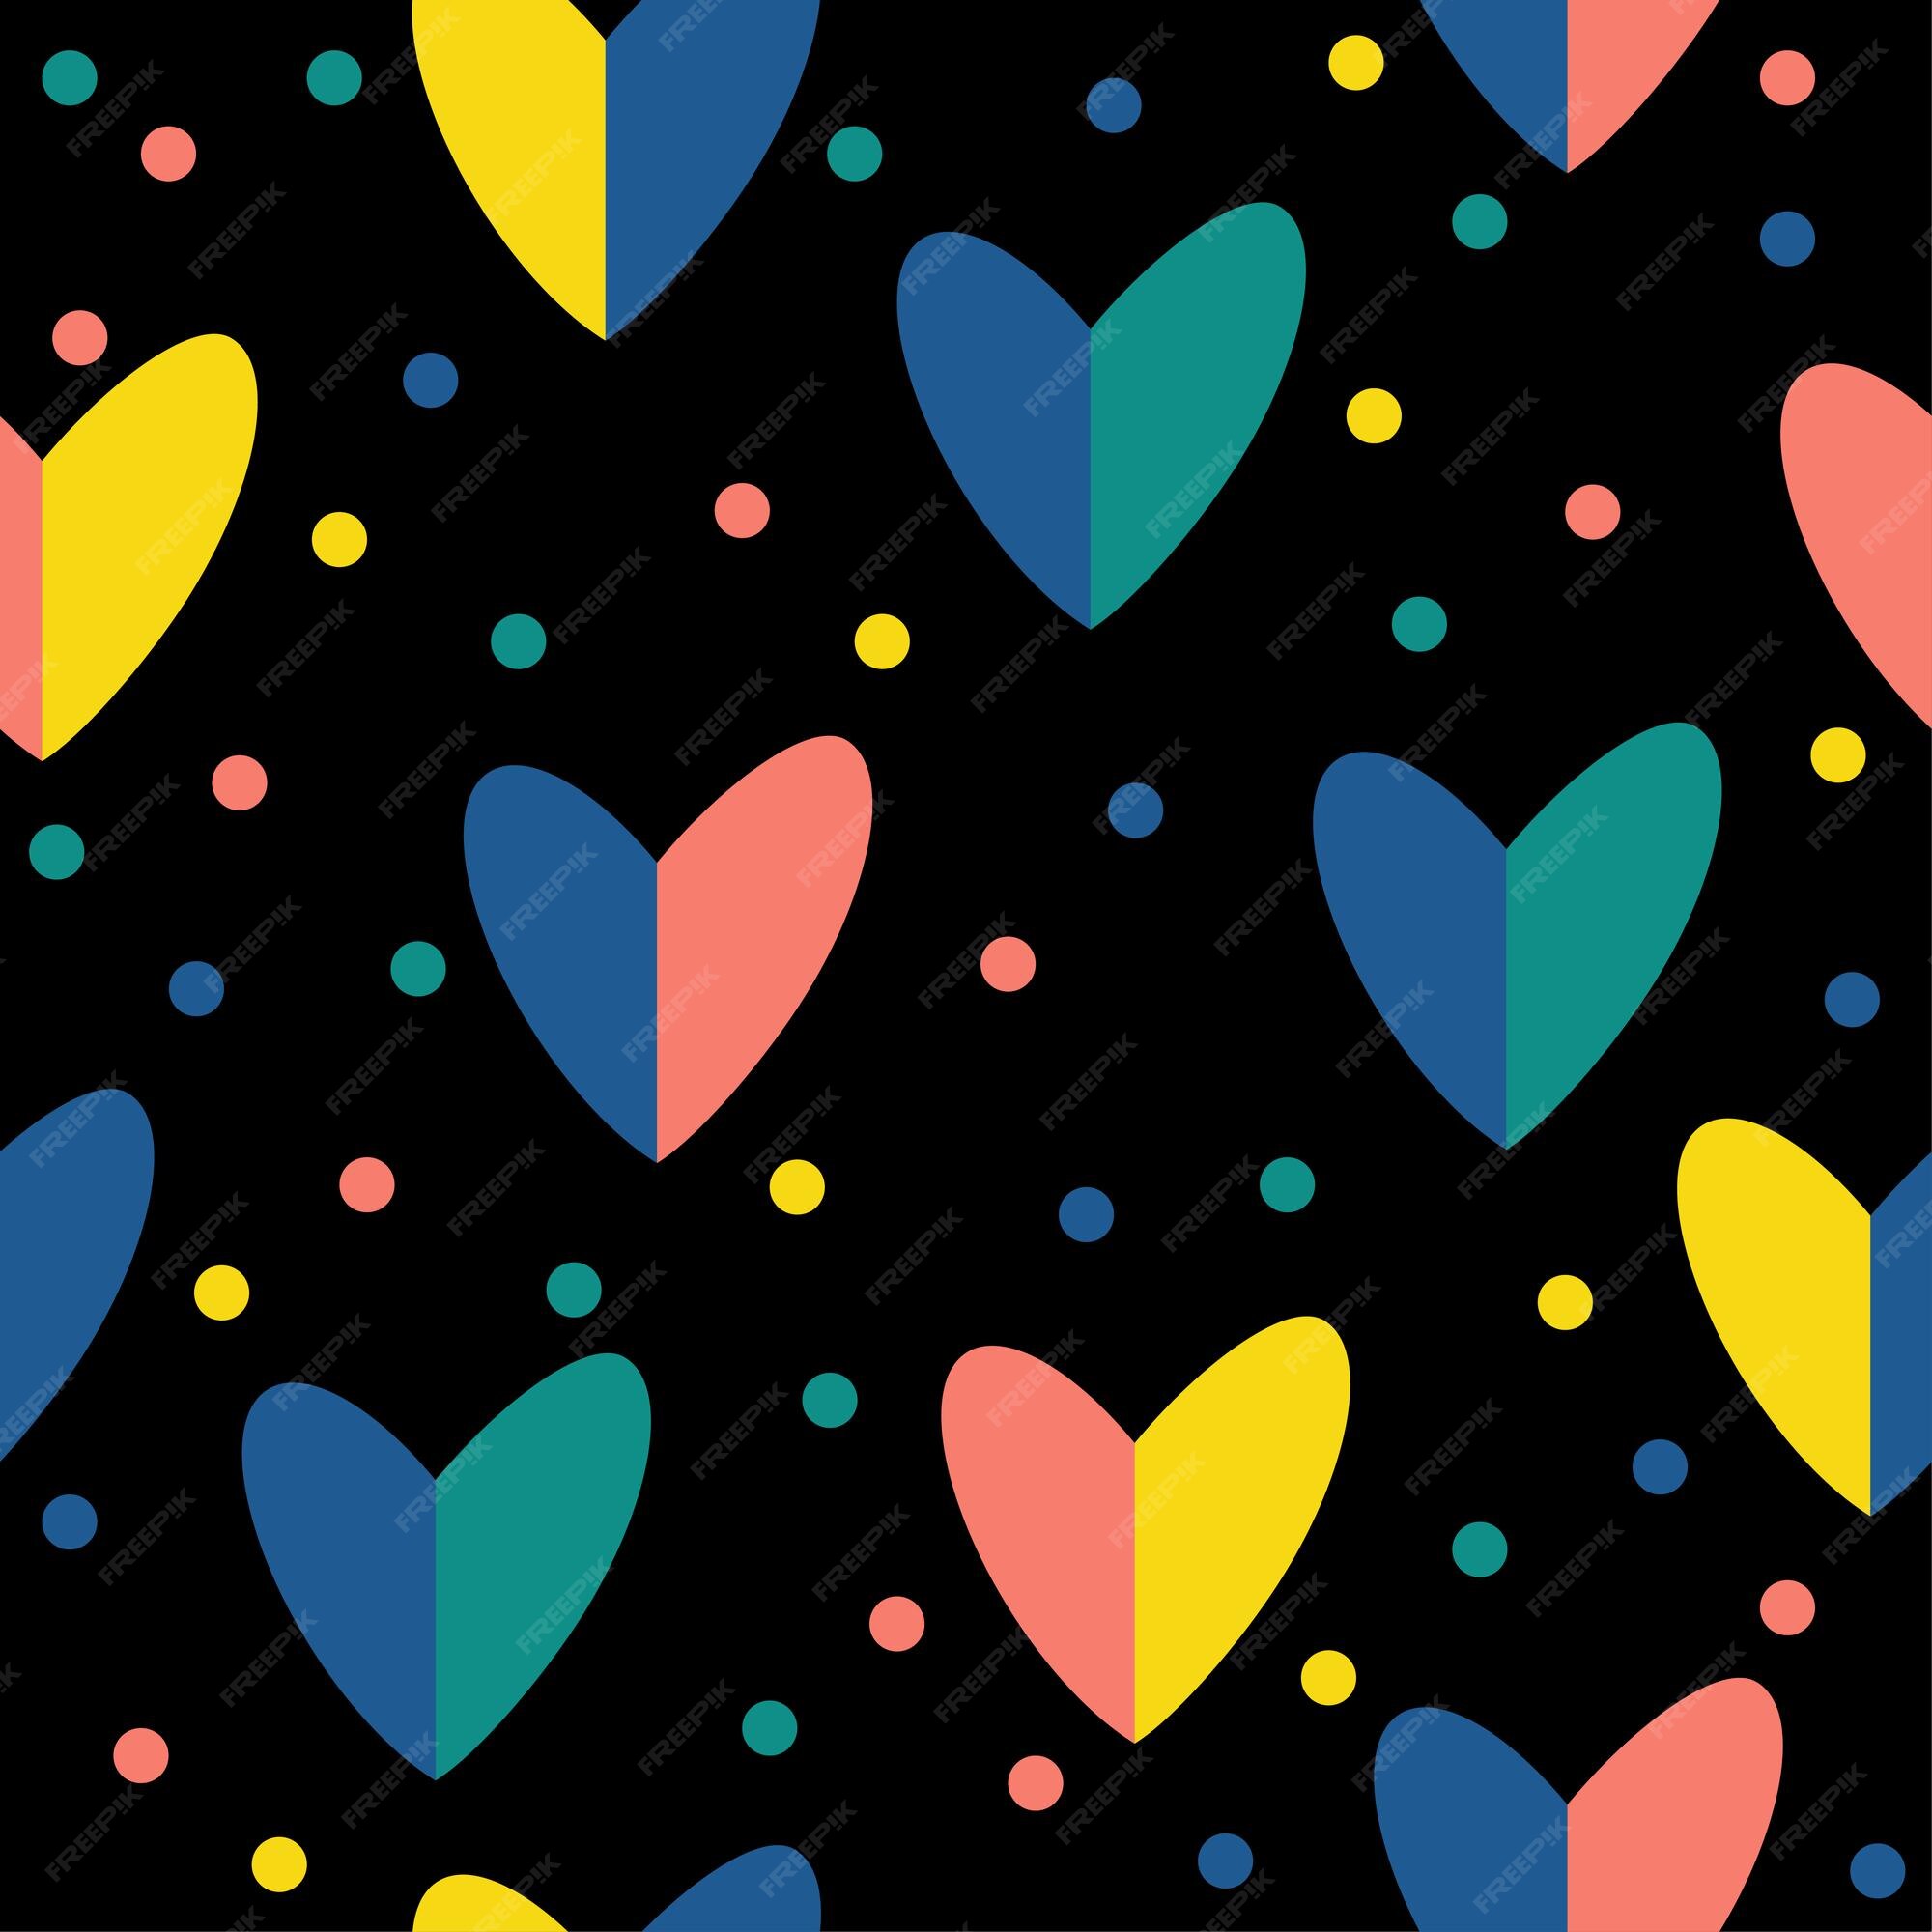 Premium Vector | Abstract handmade heart seamless pattern background.  childish handcrafted wallpaper for design wedding card, valentine's day  invitation, love album, holiday wrapping paper, bag print, t shirt etc.